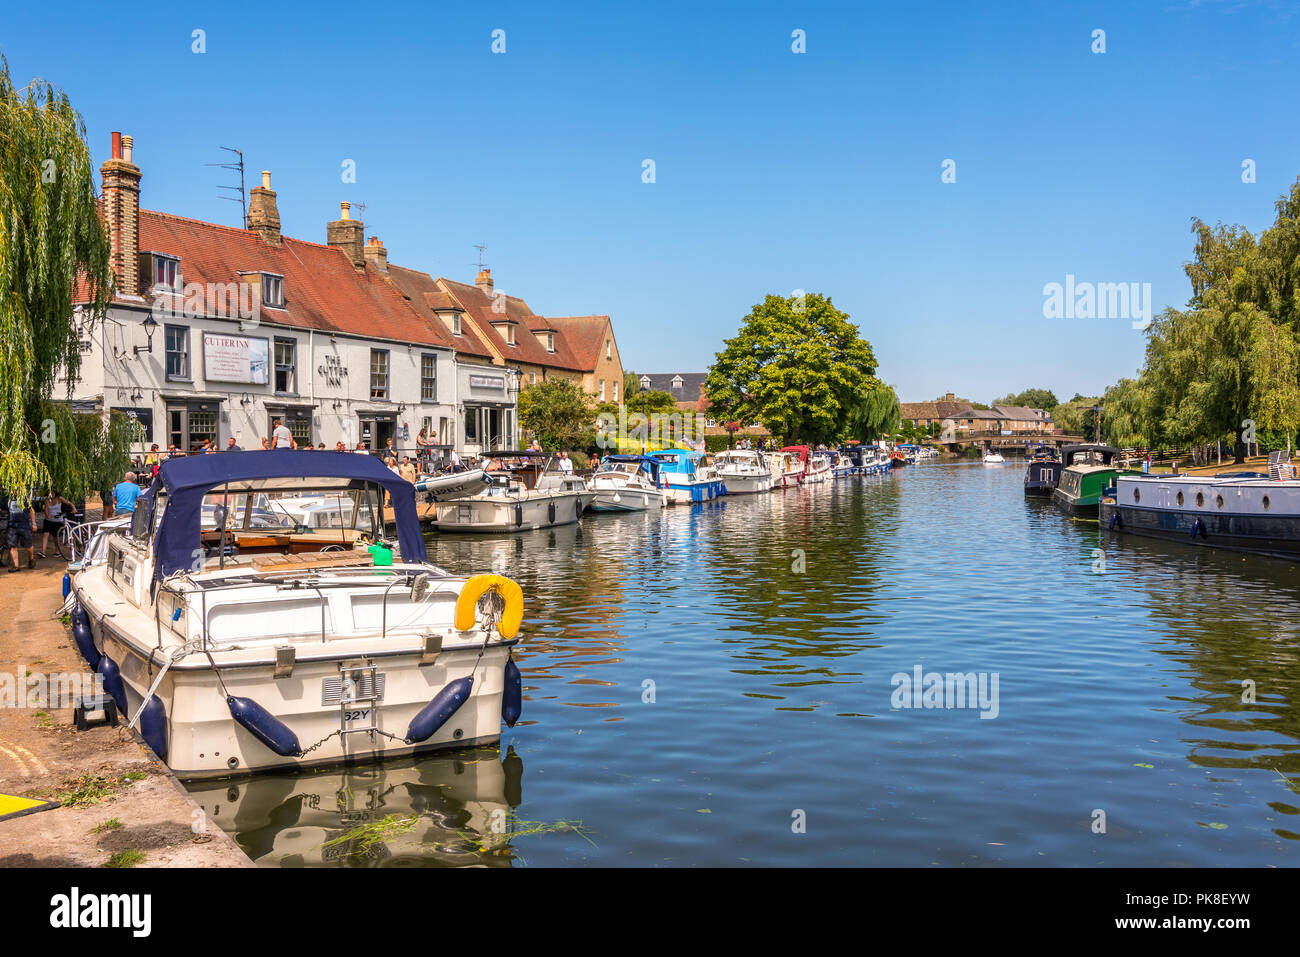 River Ouse, Ely Stock Photo